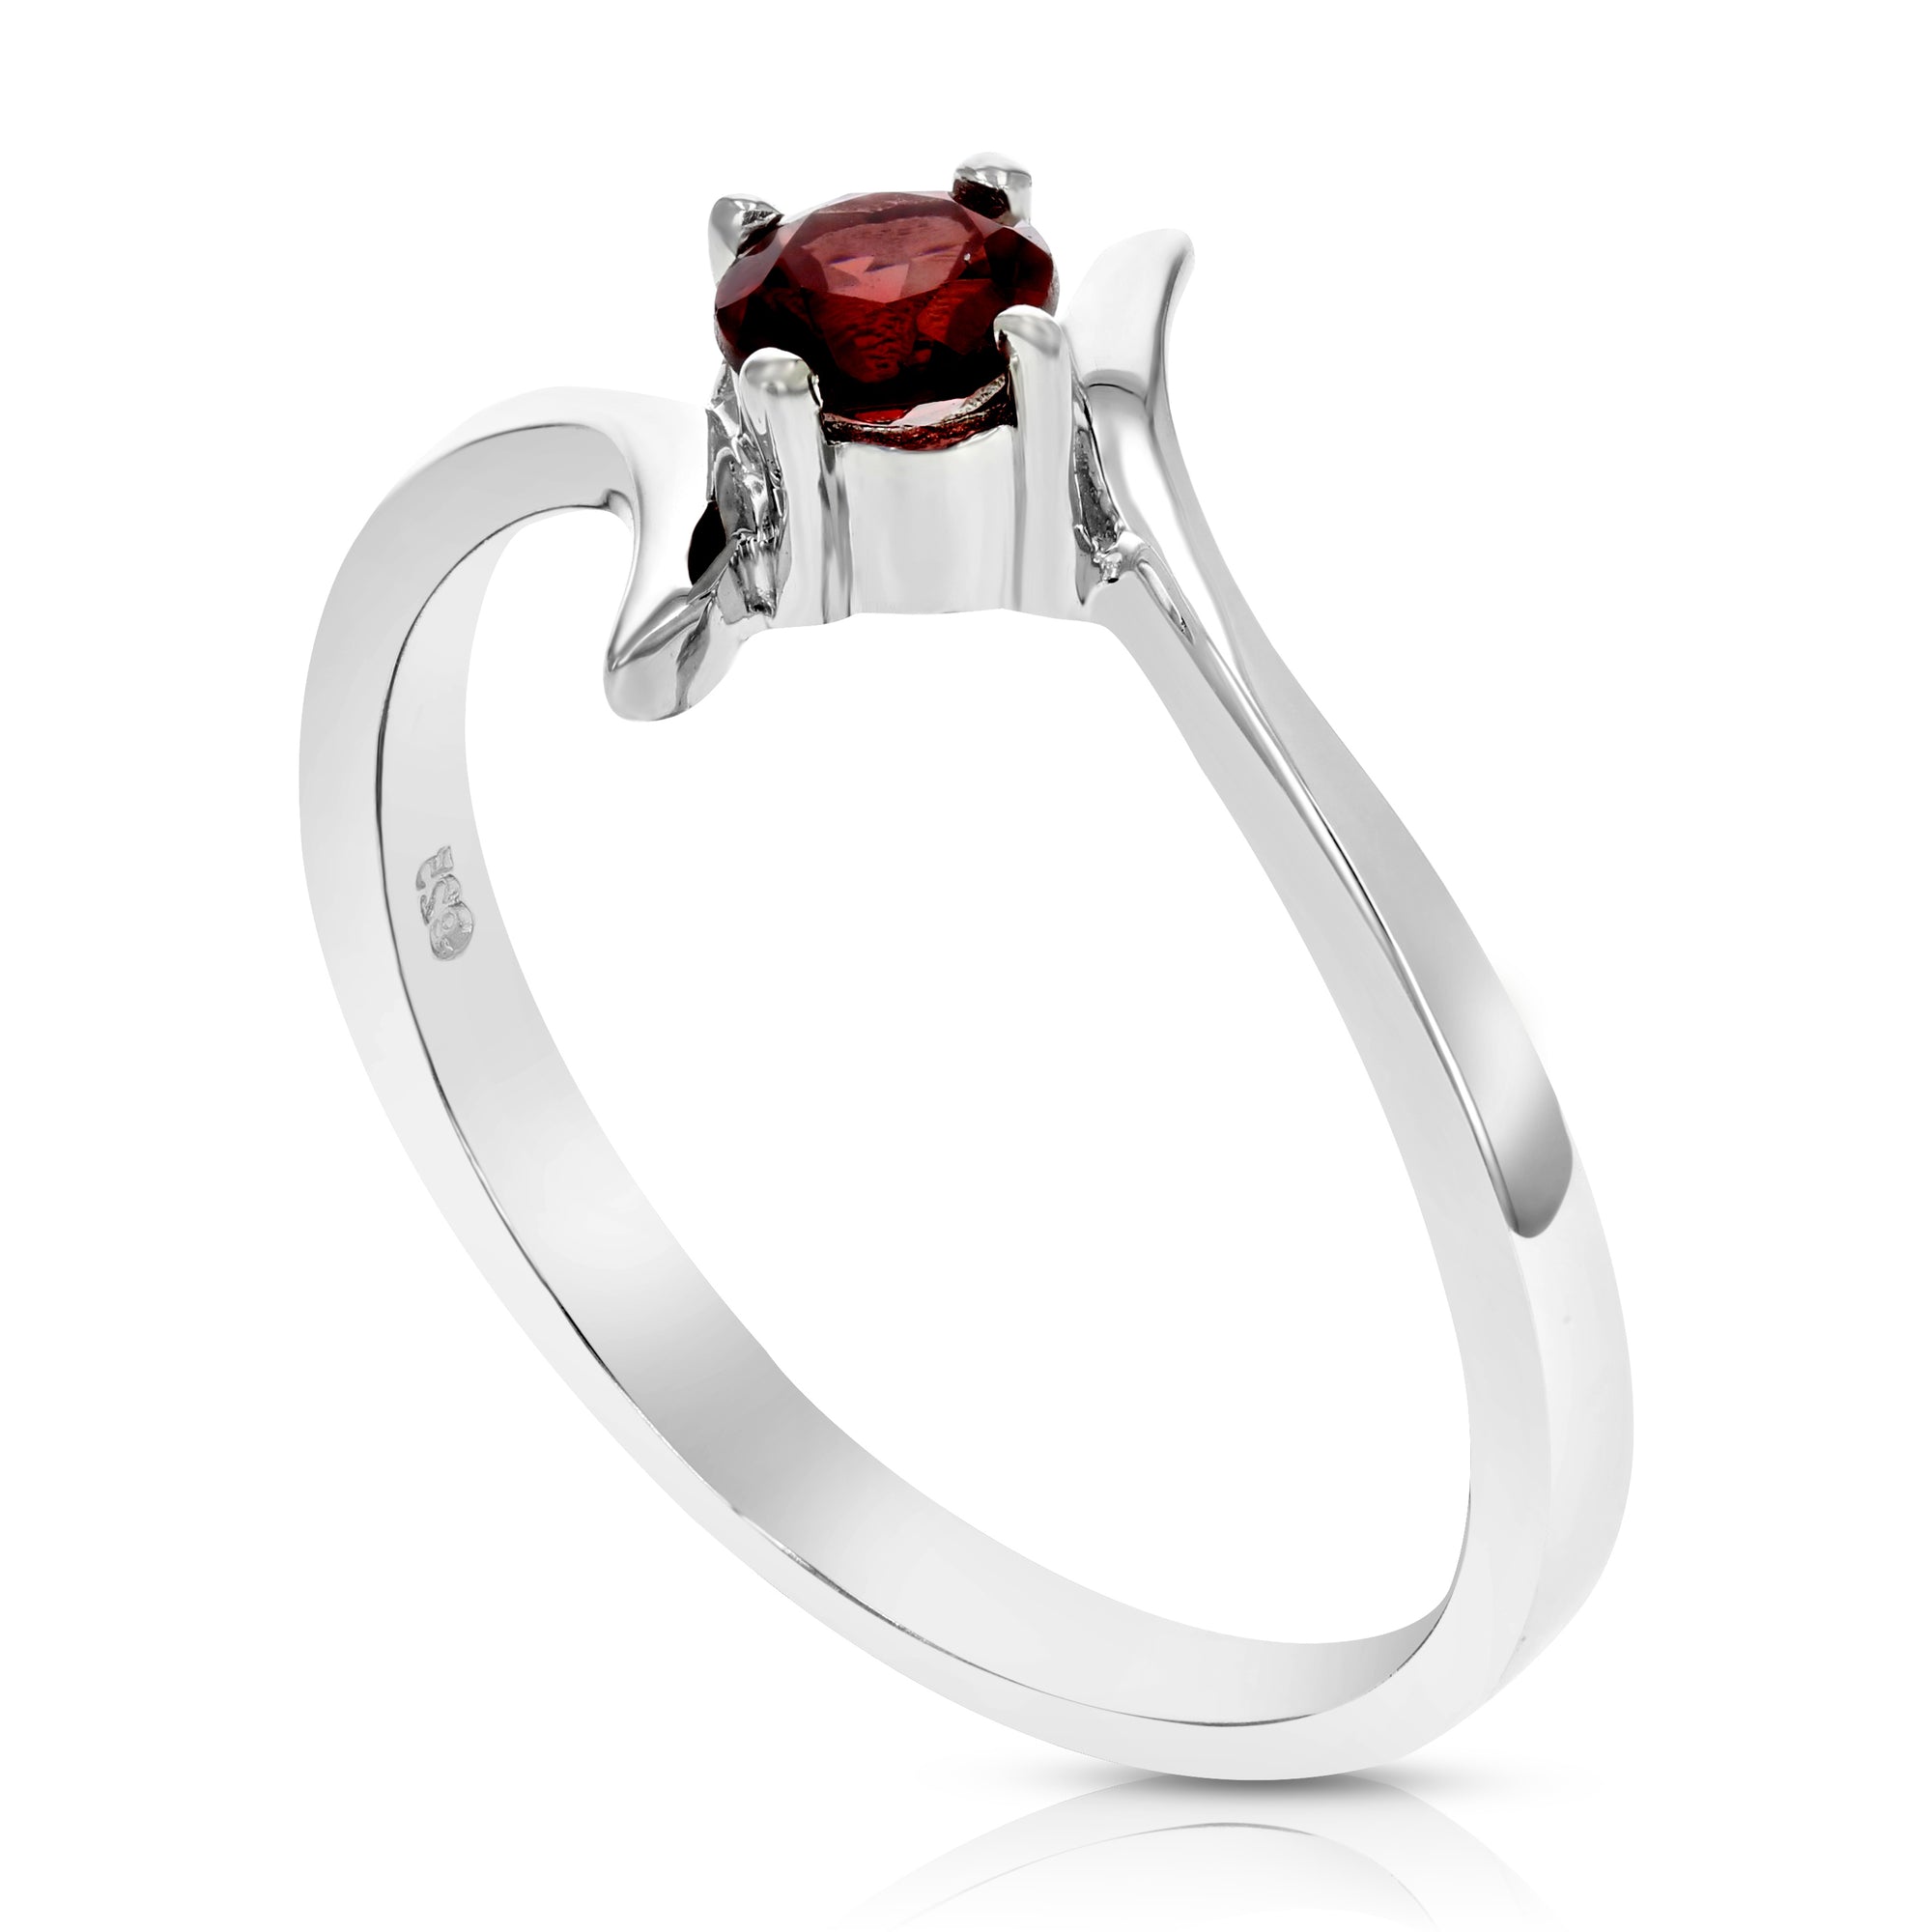 1/4 cttw Garnet Ring in .925 Sterling Silver with Rhodium Plating Round Shape